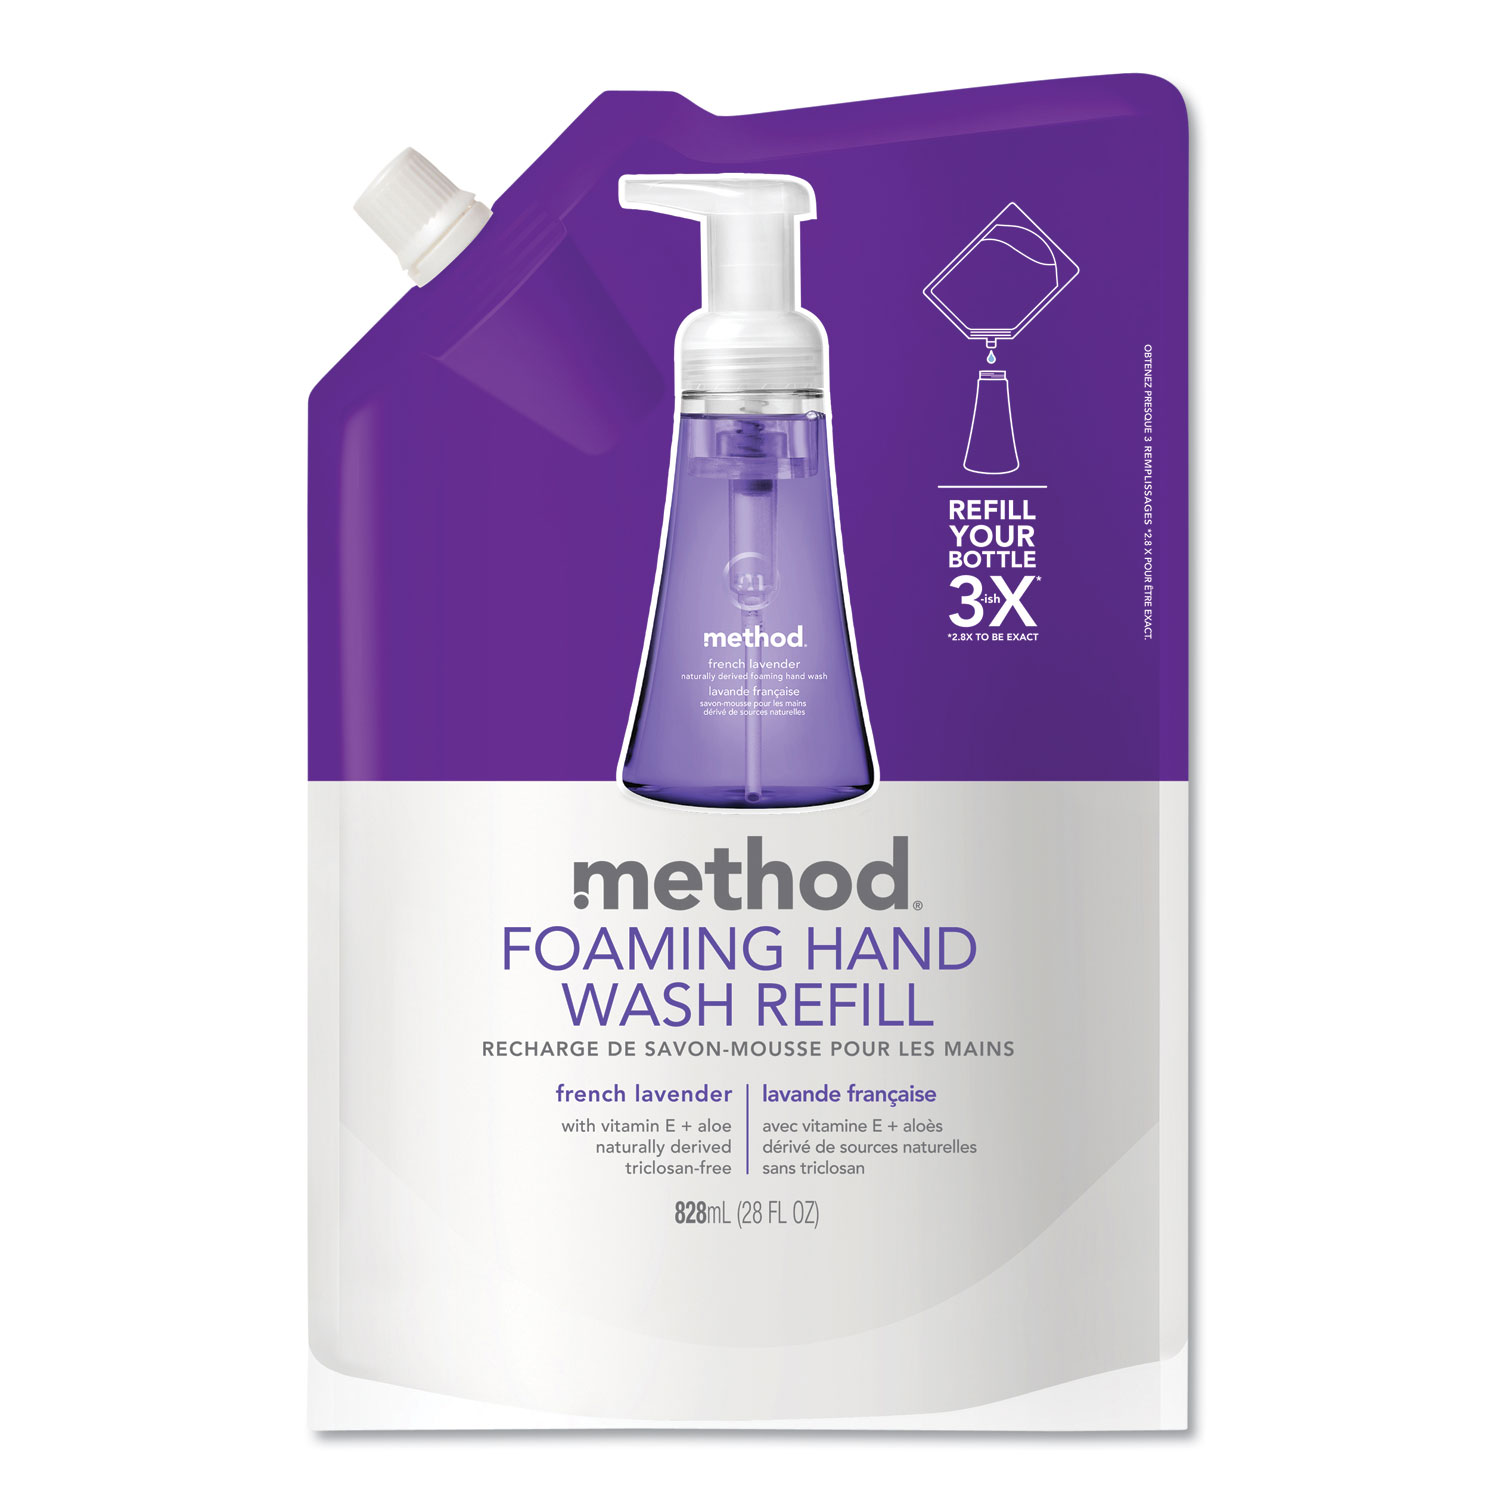 Foaming Hand Wash Refill, French Lavender, 28 oz